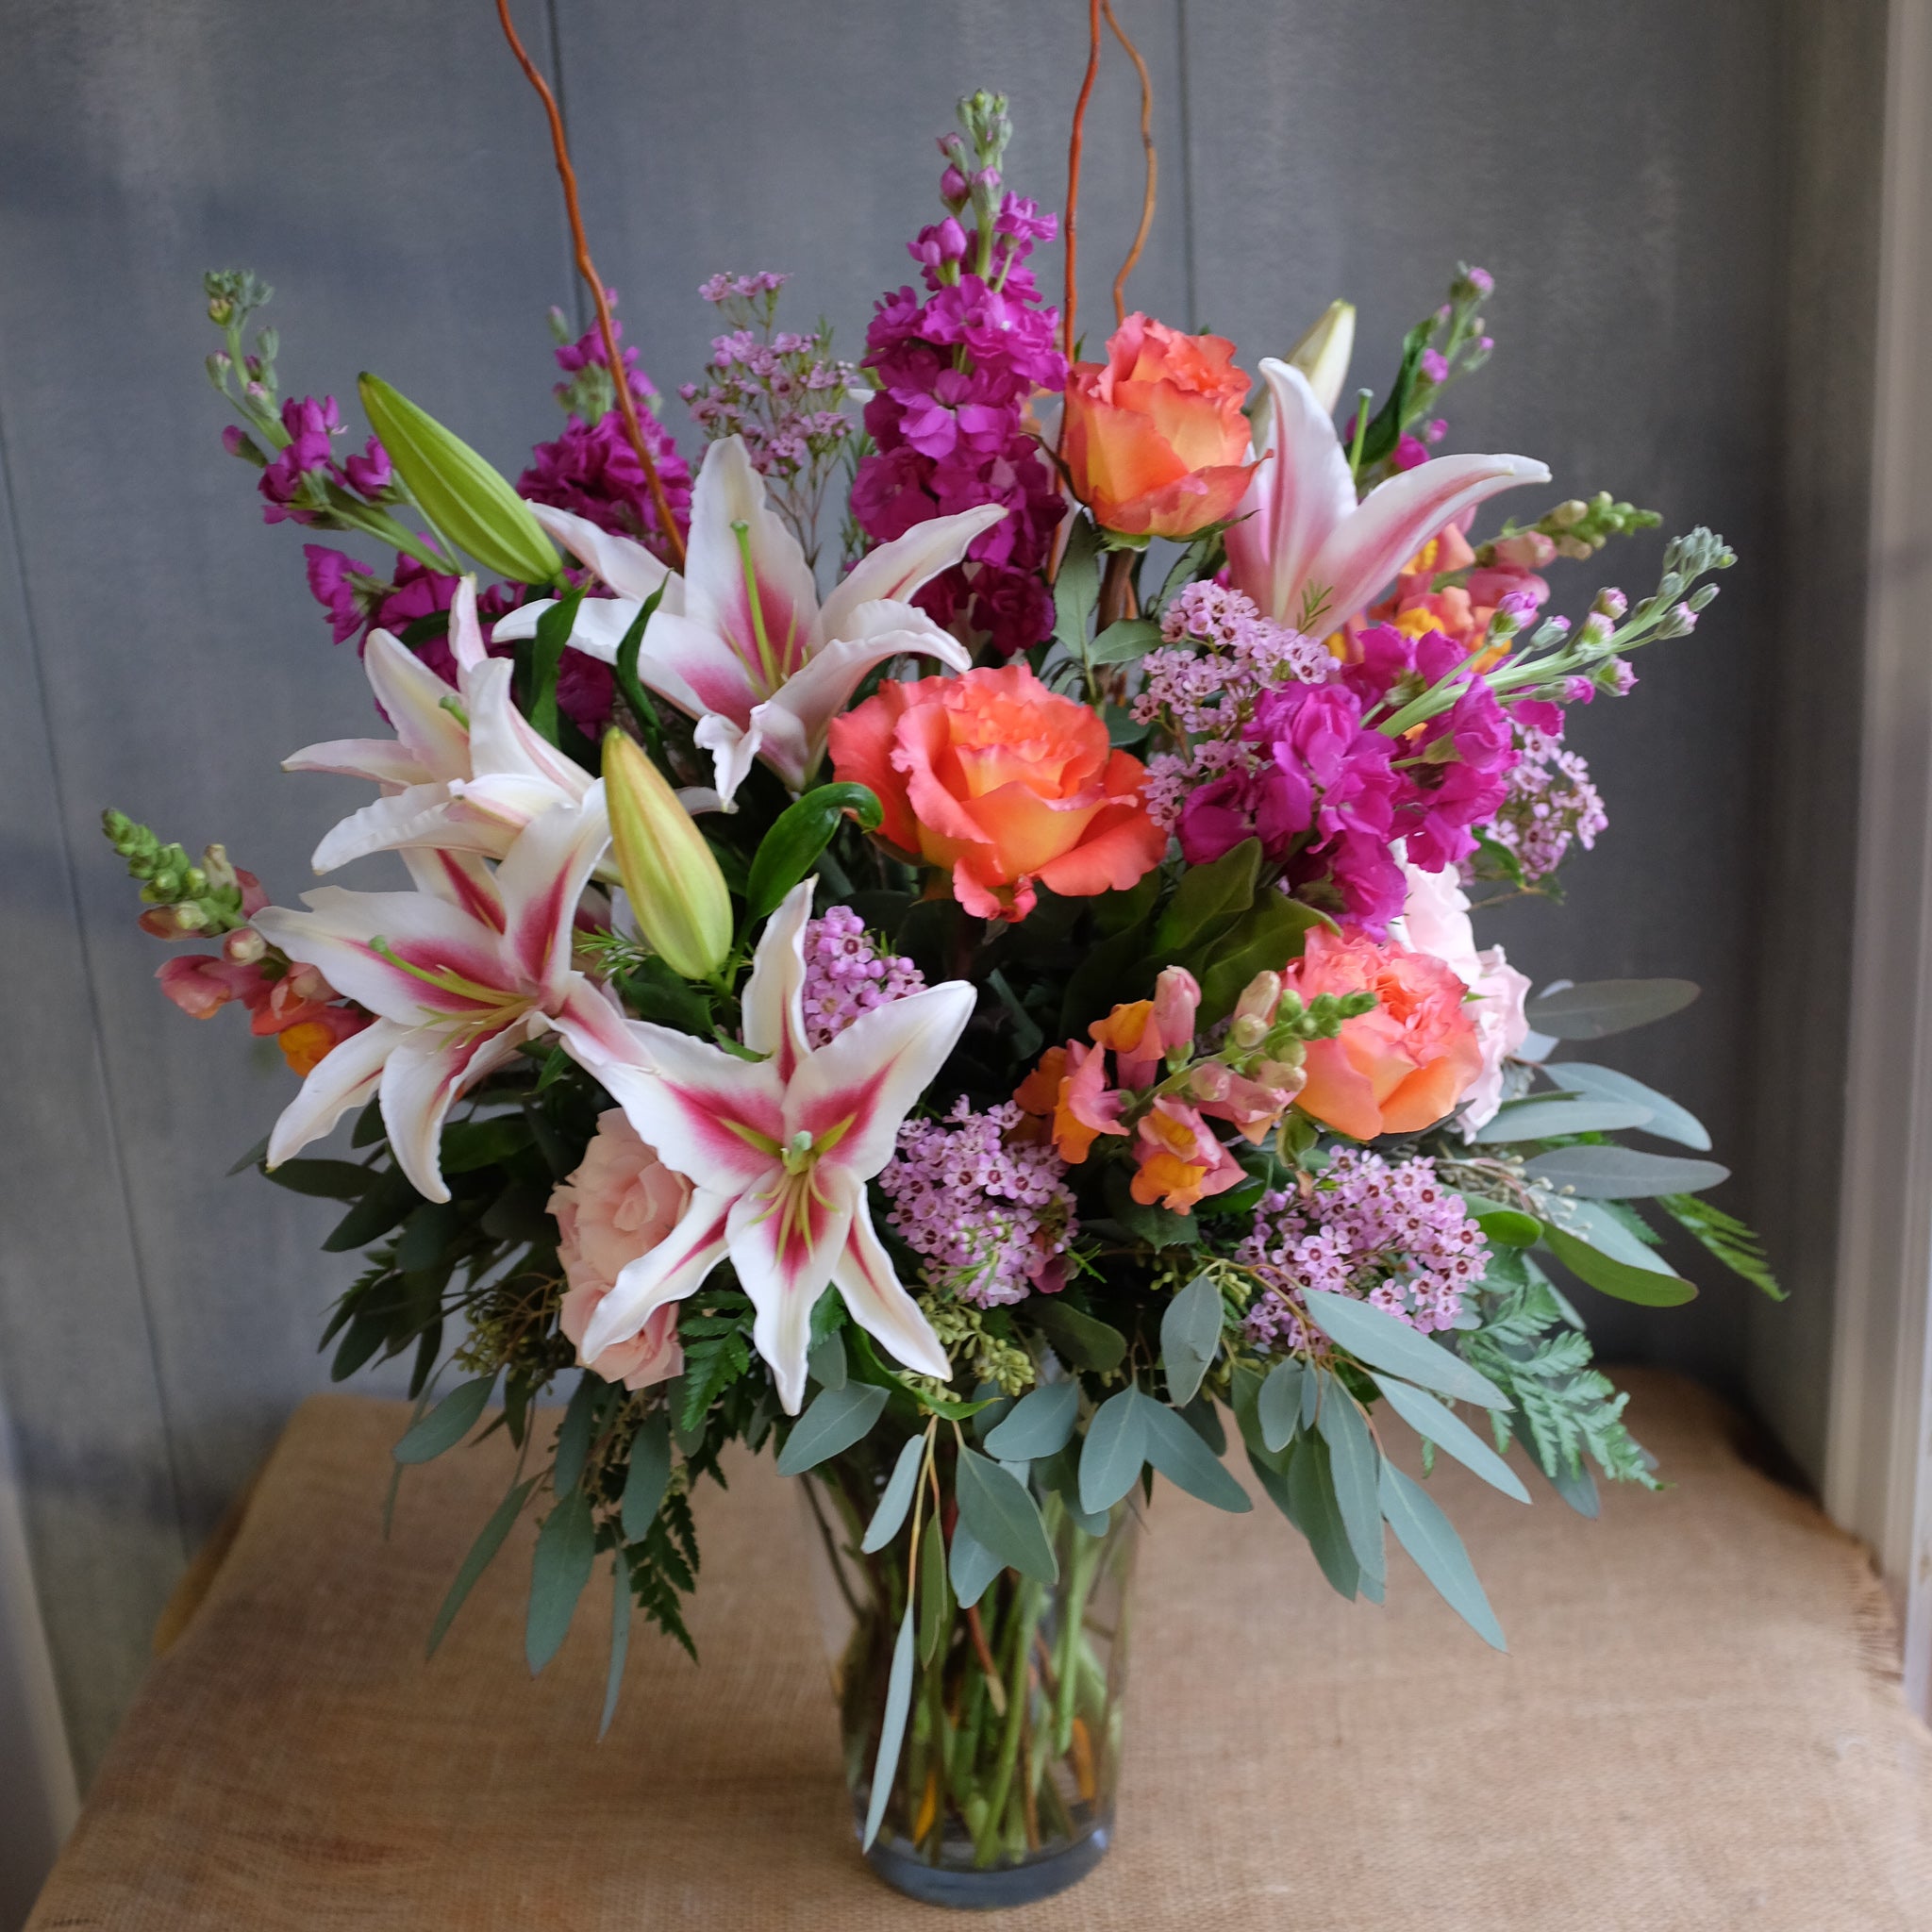 Large bouquet brimming with warm and vibrant flowers.